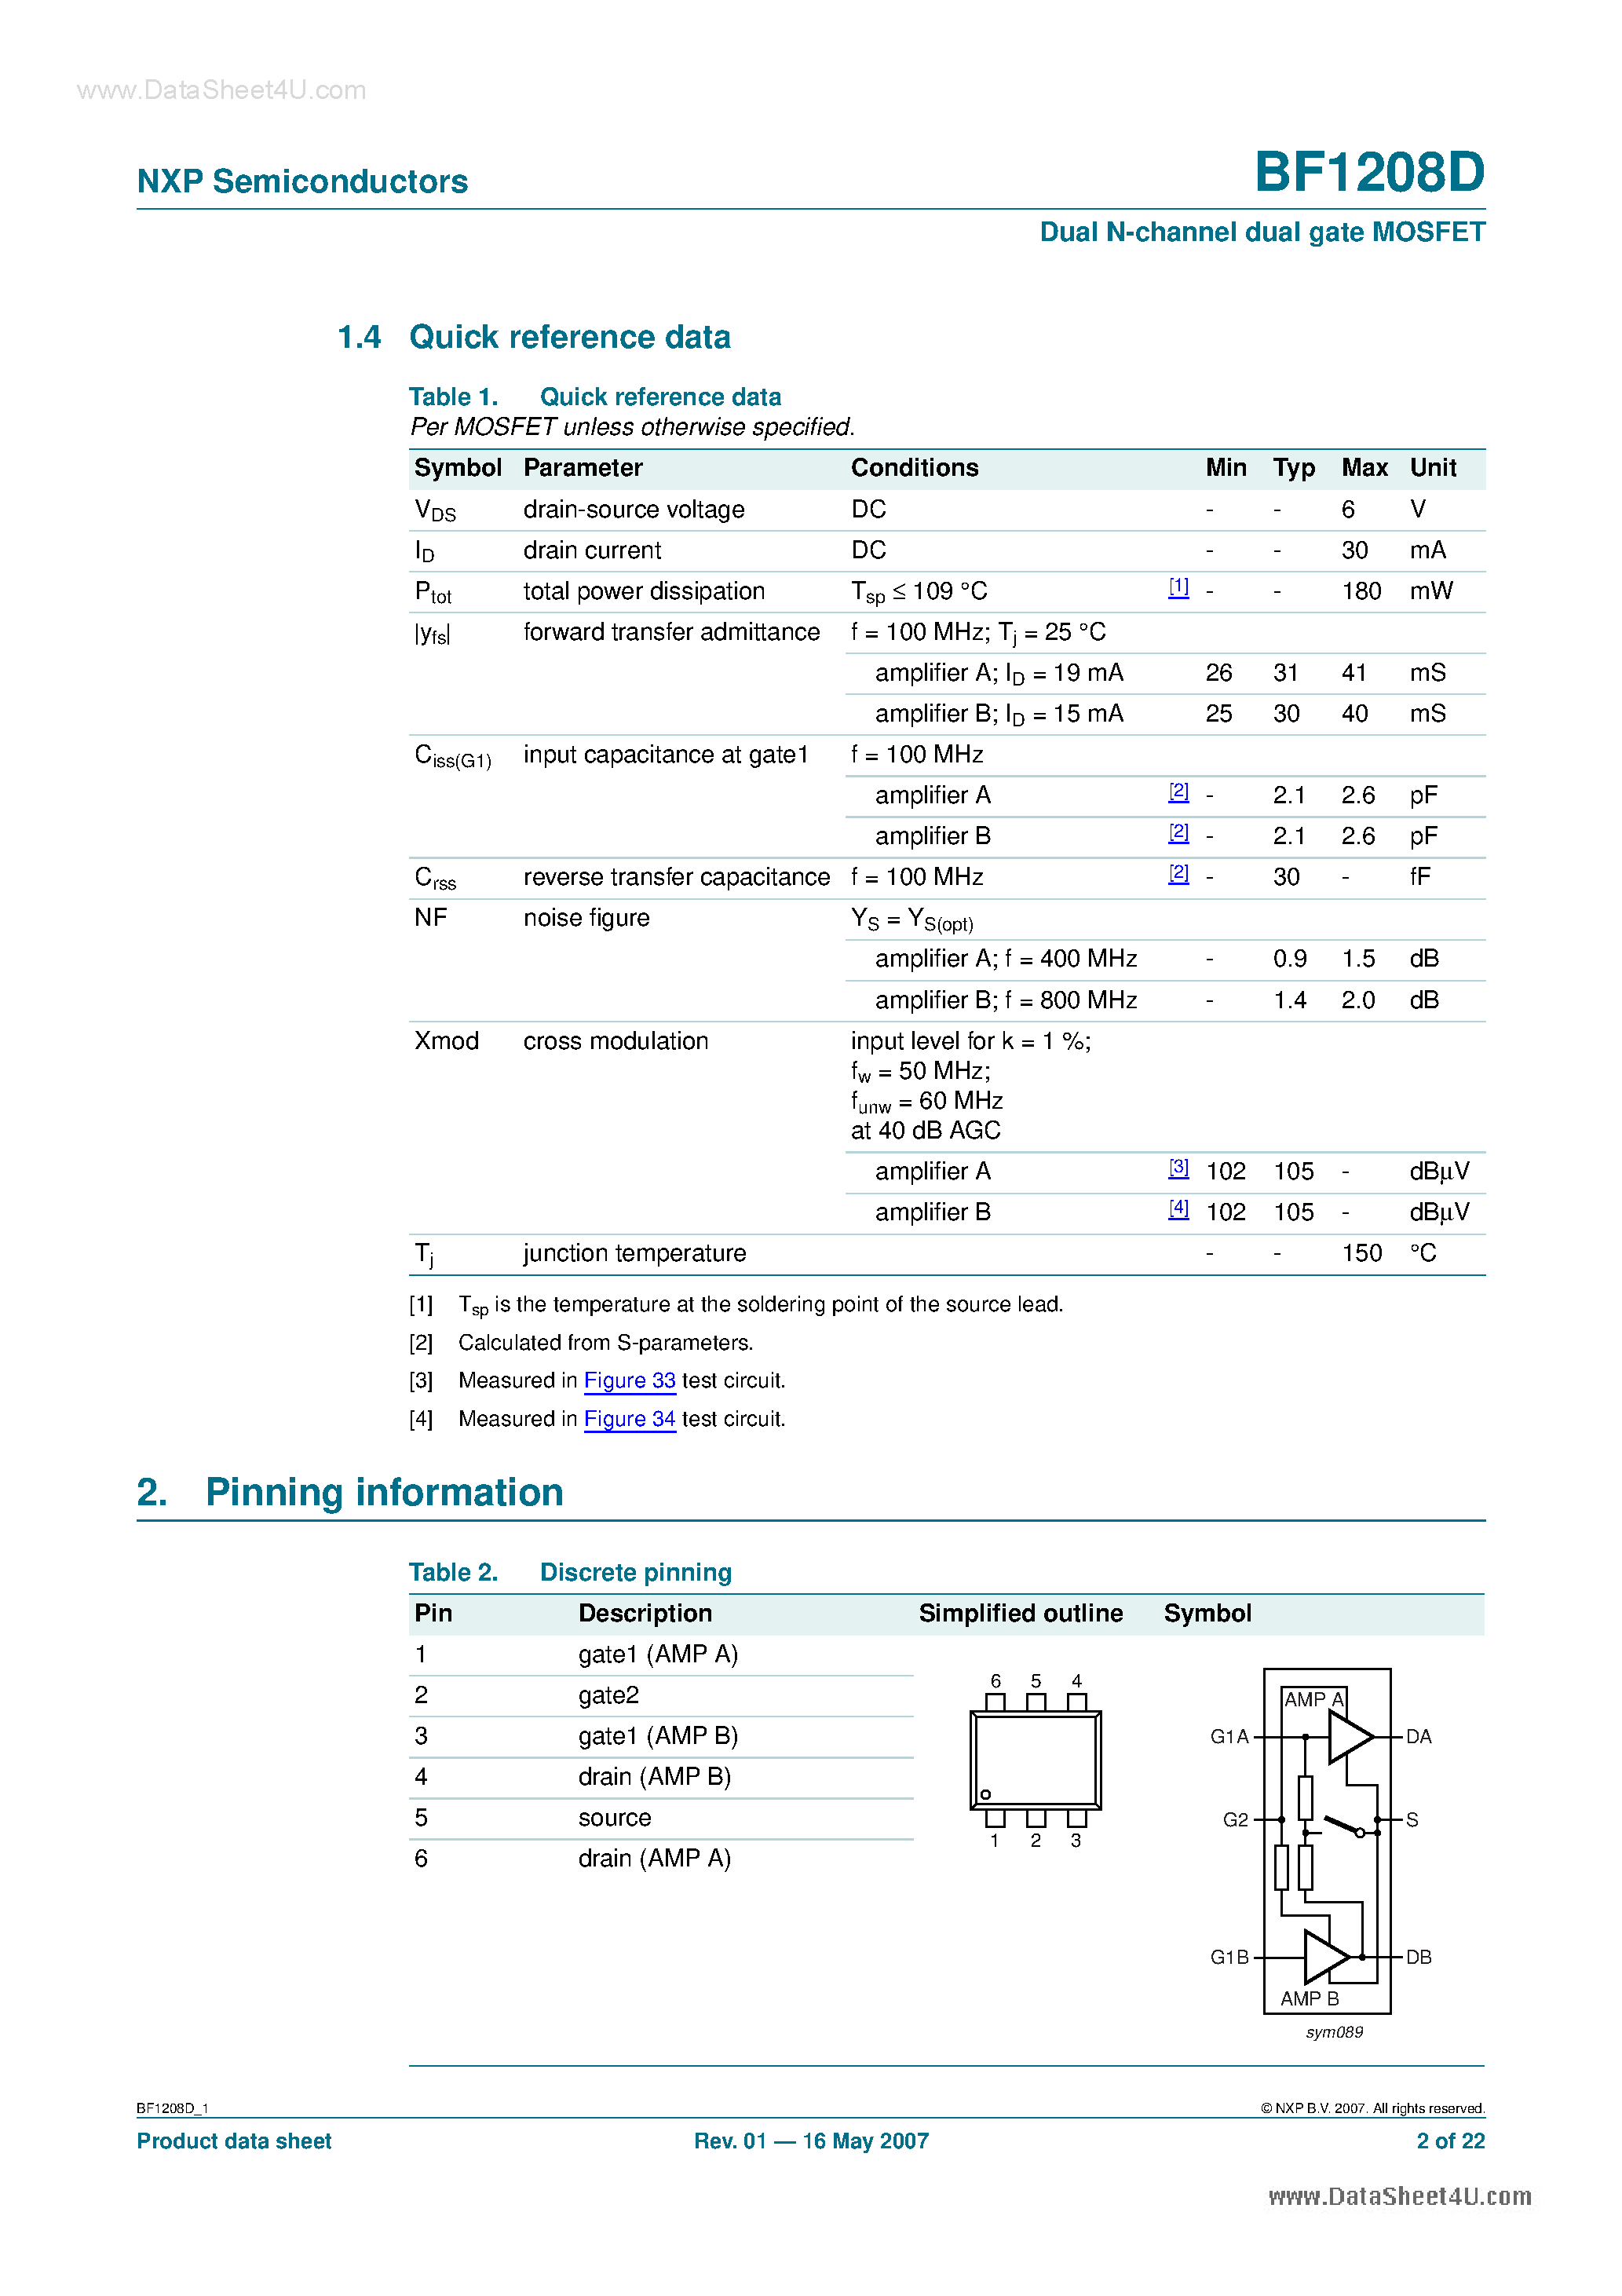 Datasheet BF1208D - Dual N-channel dual gate MOSFET page 2